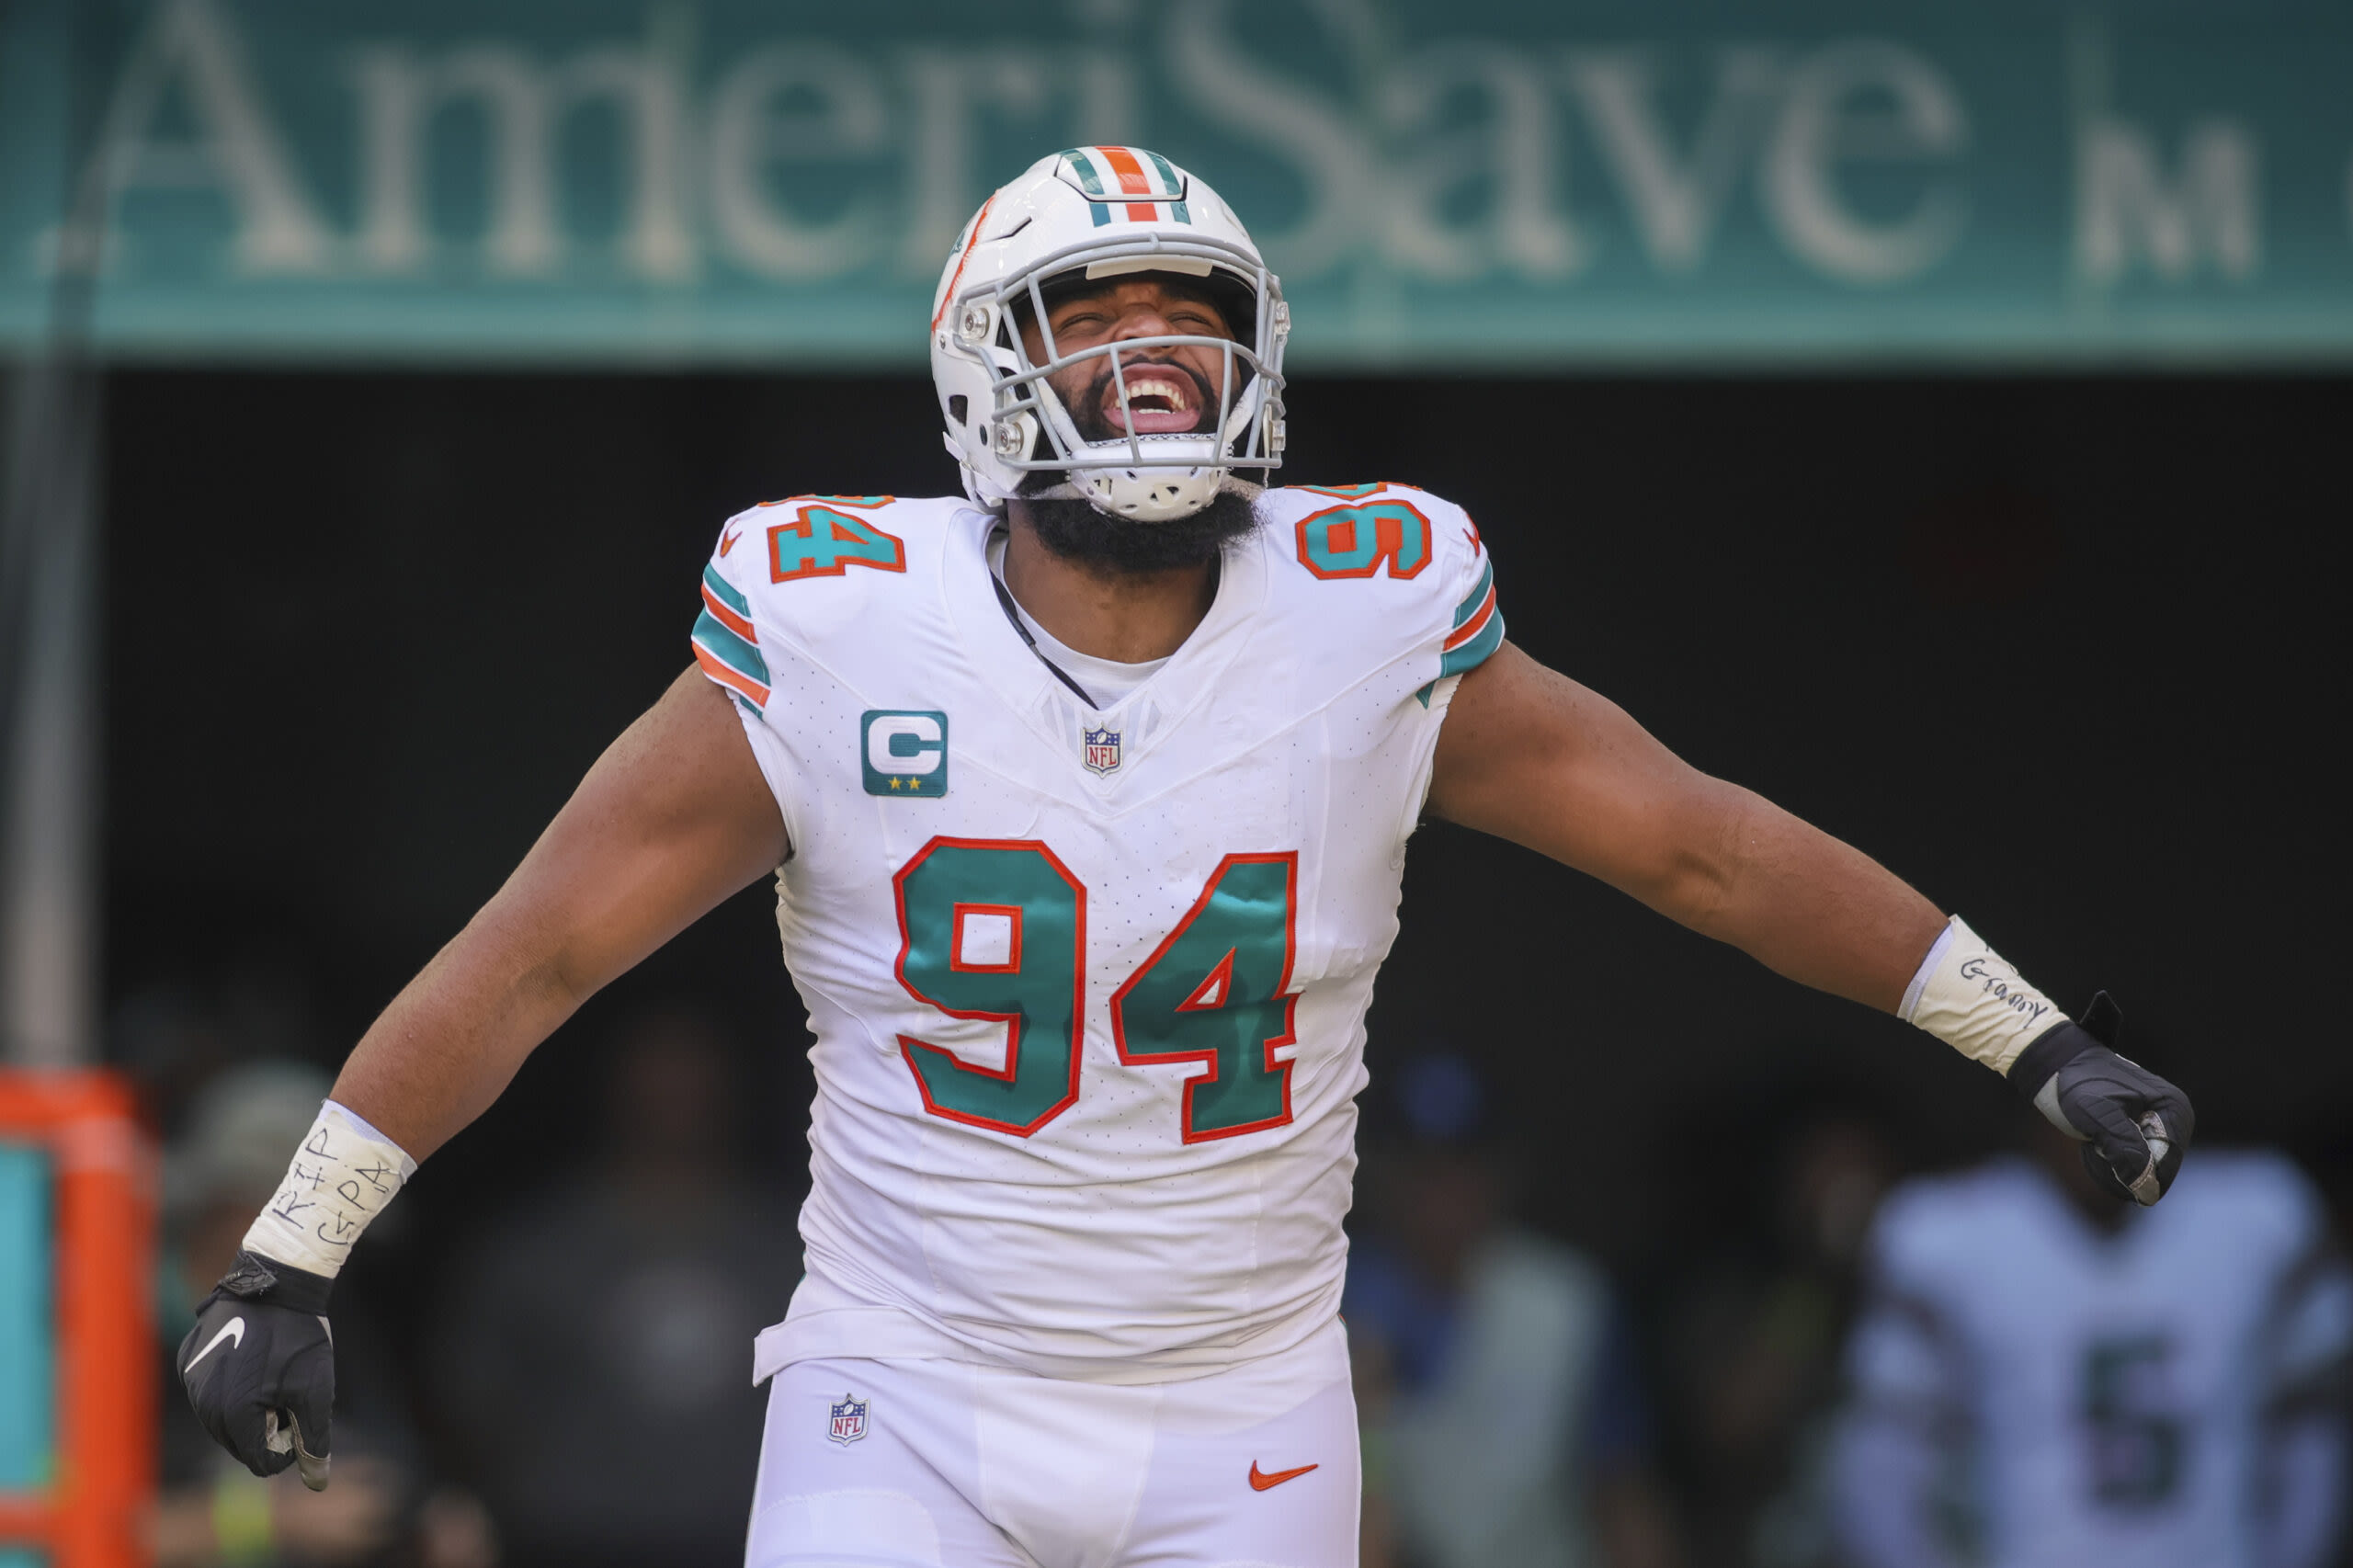 Raiders DT Christian Wilkins ranked as top 10 defensive tackle by PFF